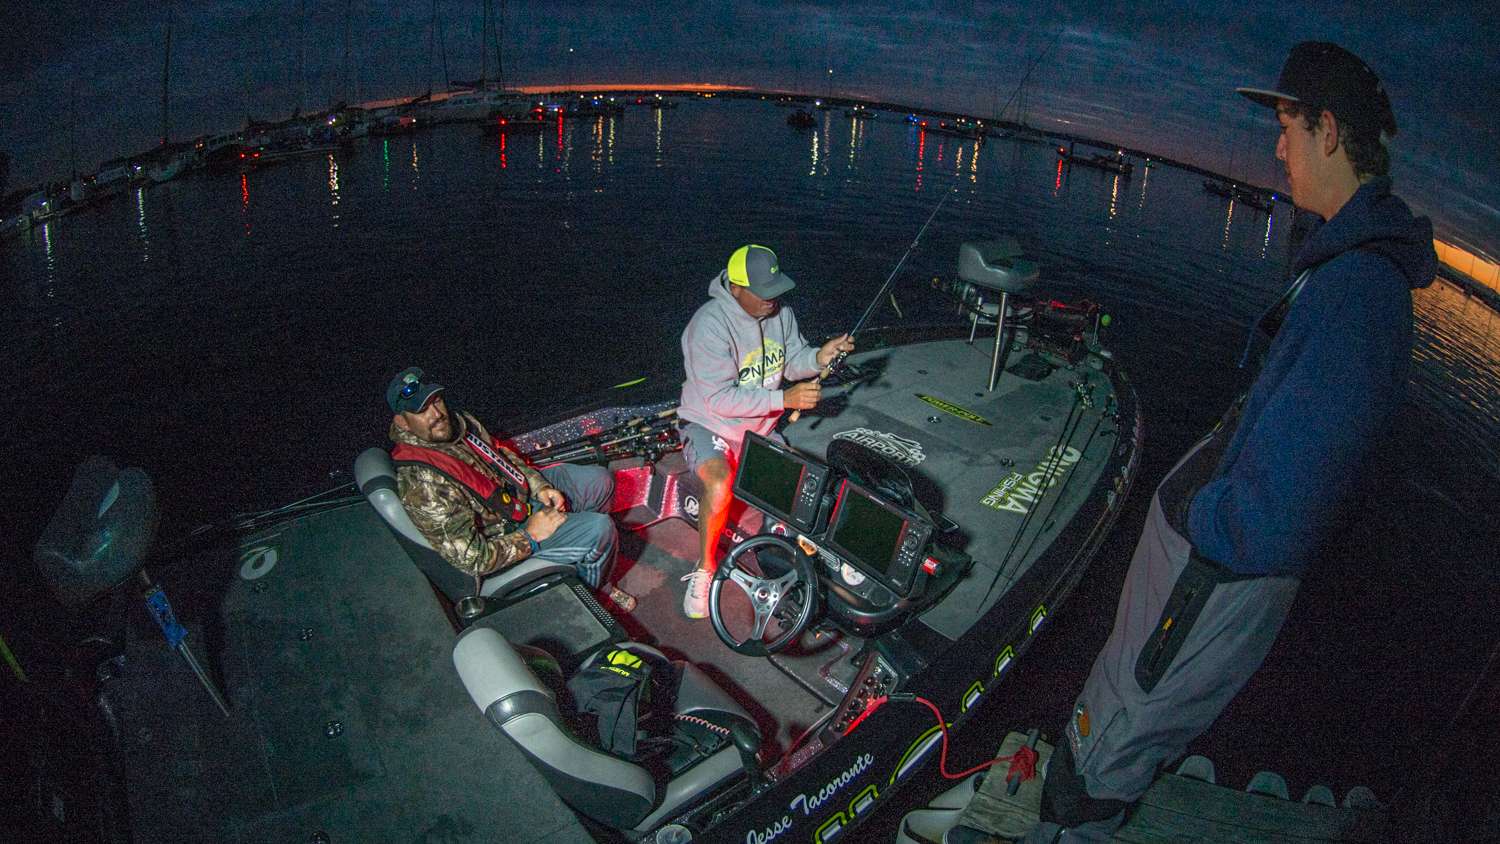 Tournament leader Jesse Tacoronte lines up as boat number one and checks his rods over while talking about yesterdays hot fishing action. 